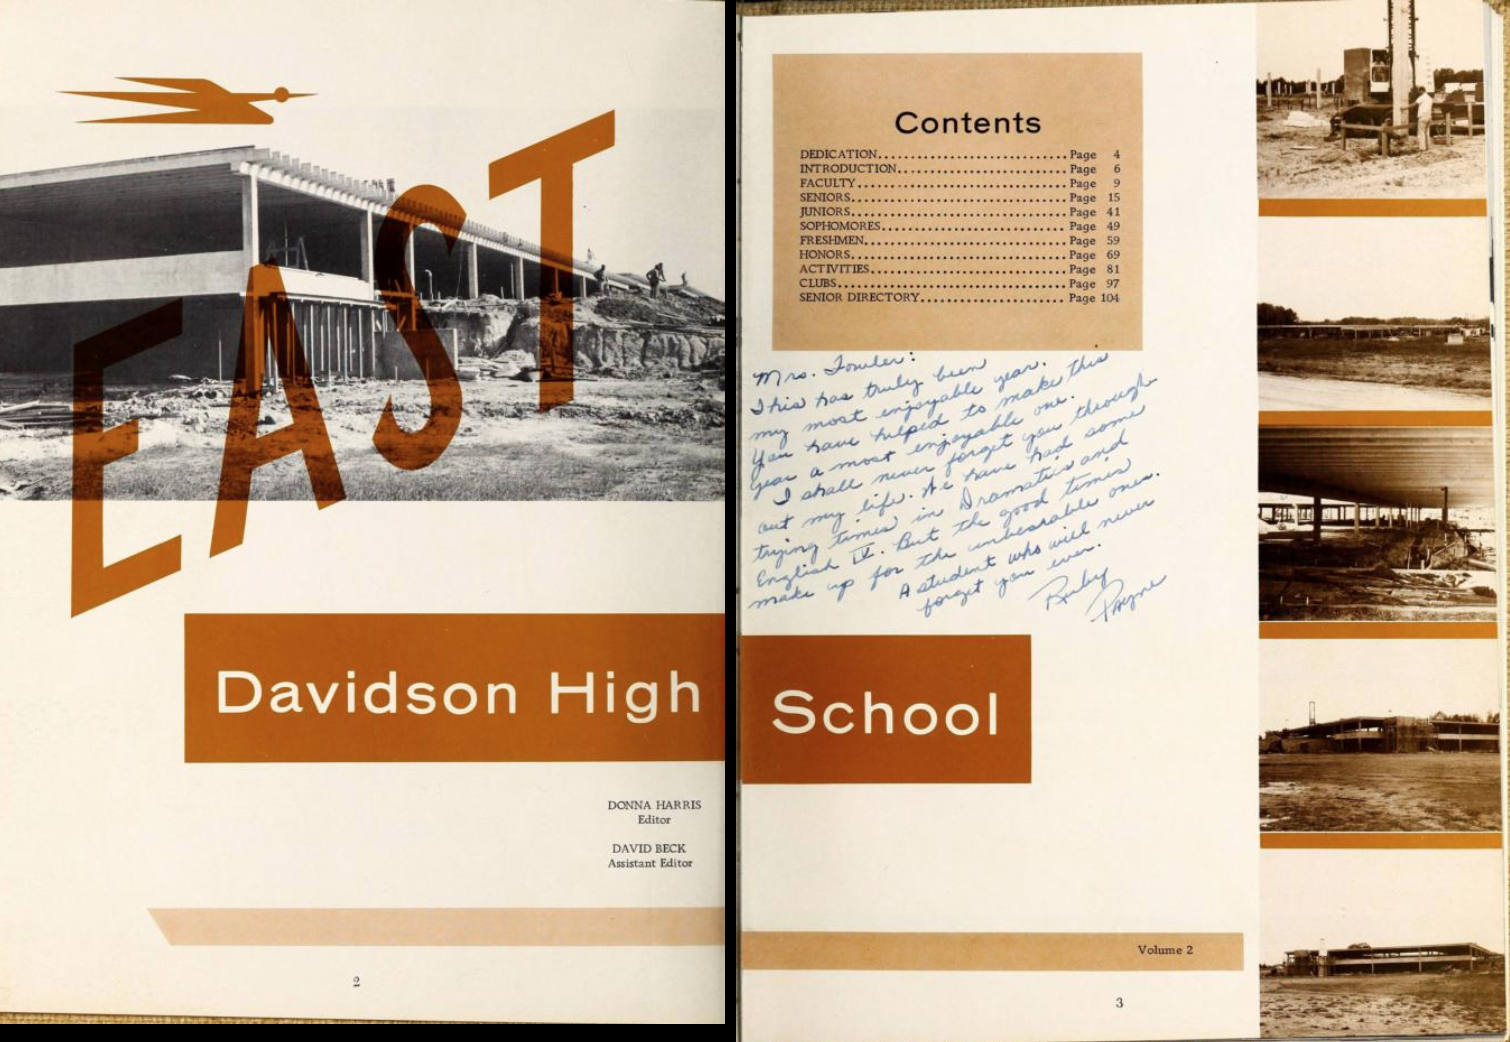 Two-page spread from the 1963 East Davidson High School yearbook The Claw. These pages show the contents of the yearbook as well as artfully arranged photos of the construction of the new section of school. The page is colored in monochrome orange.